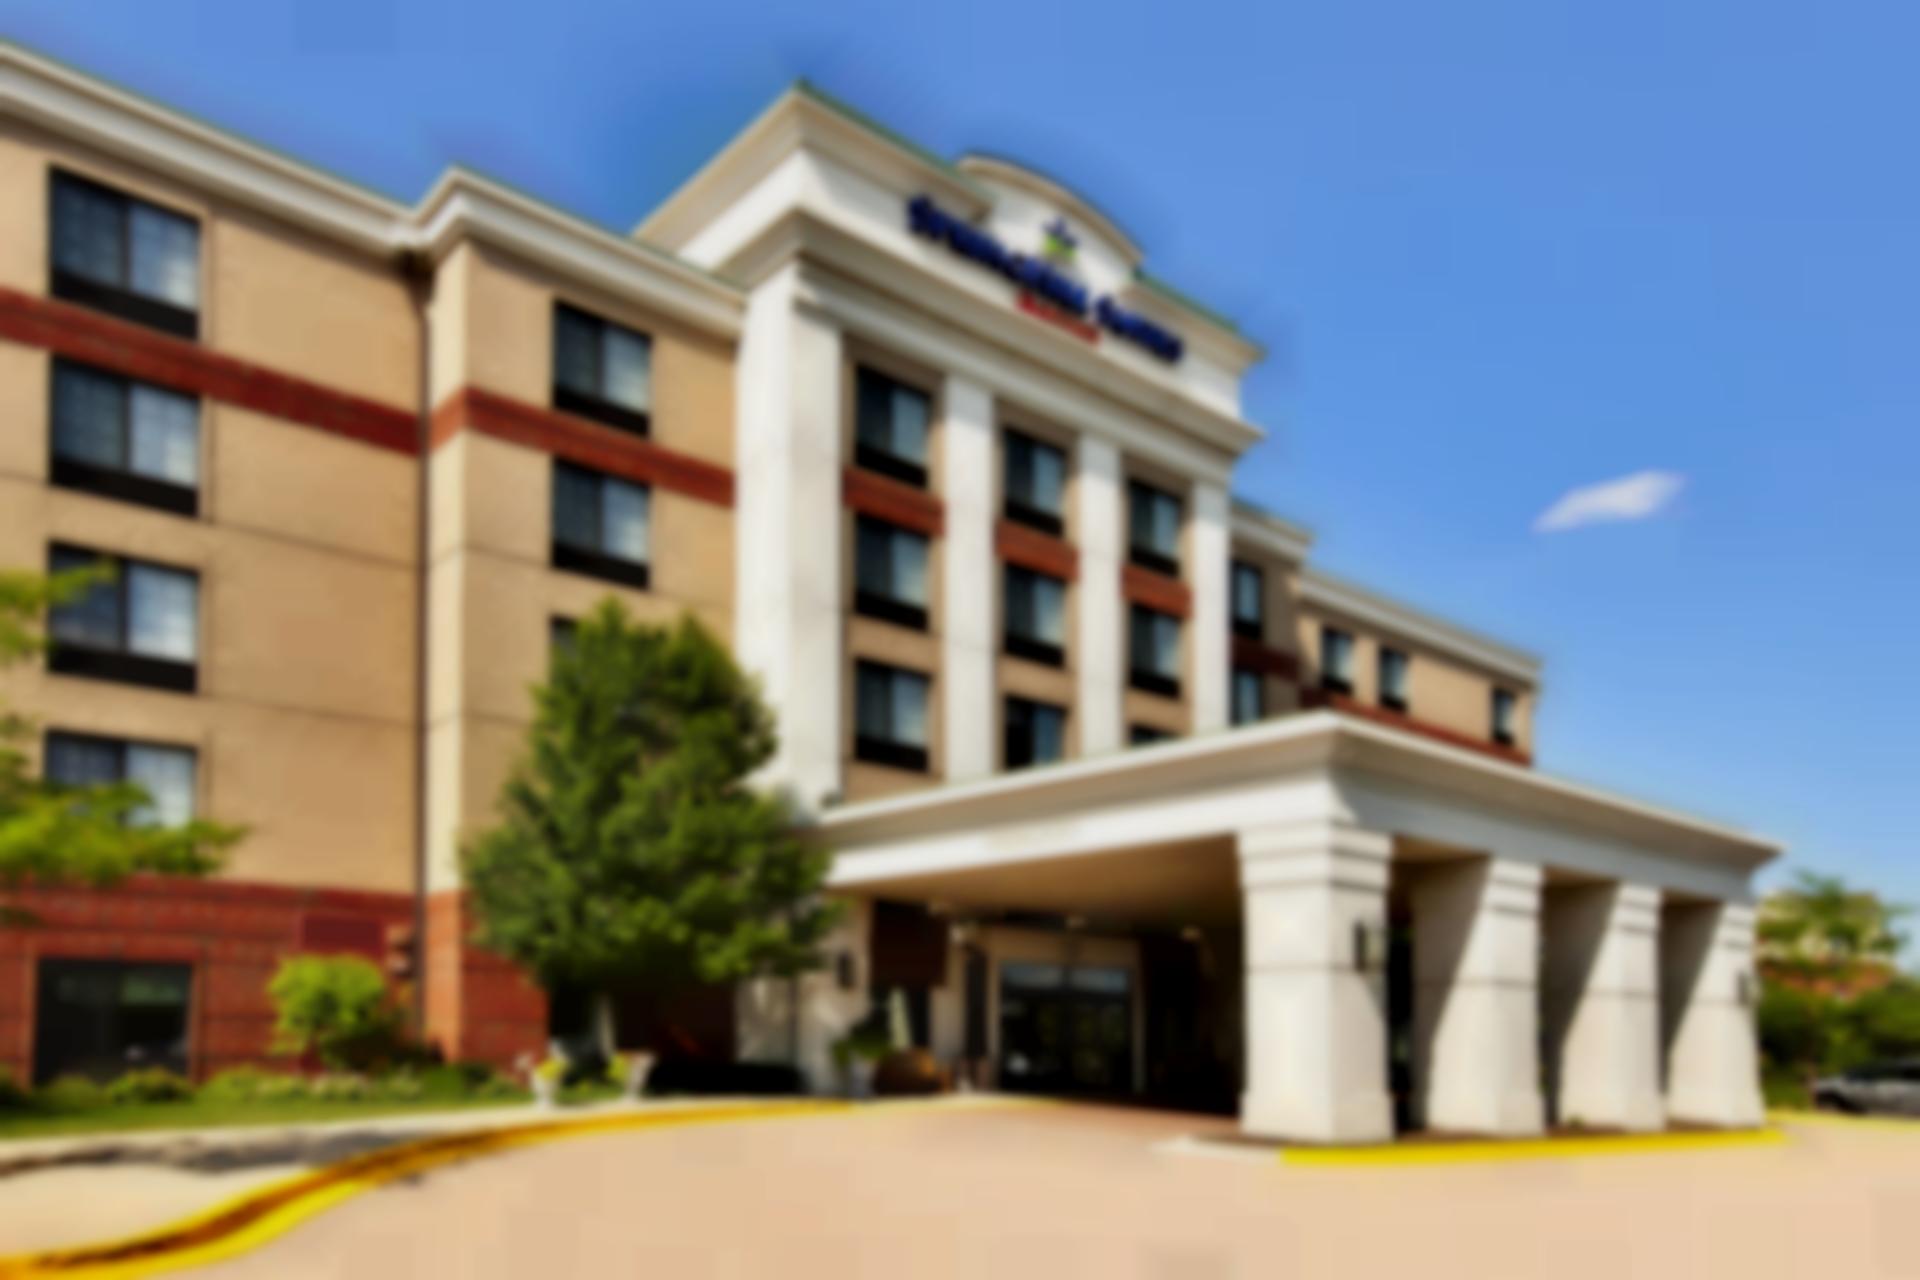 SpringHill Suites by Marriott Chicago Schaumburg/Woodfield